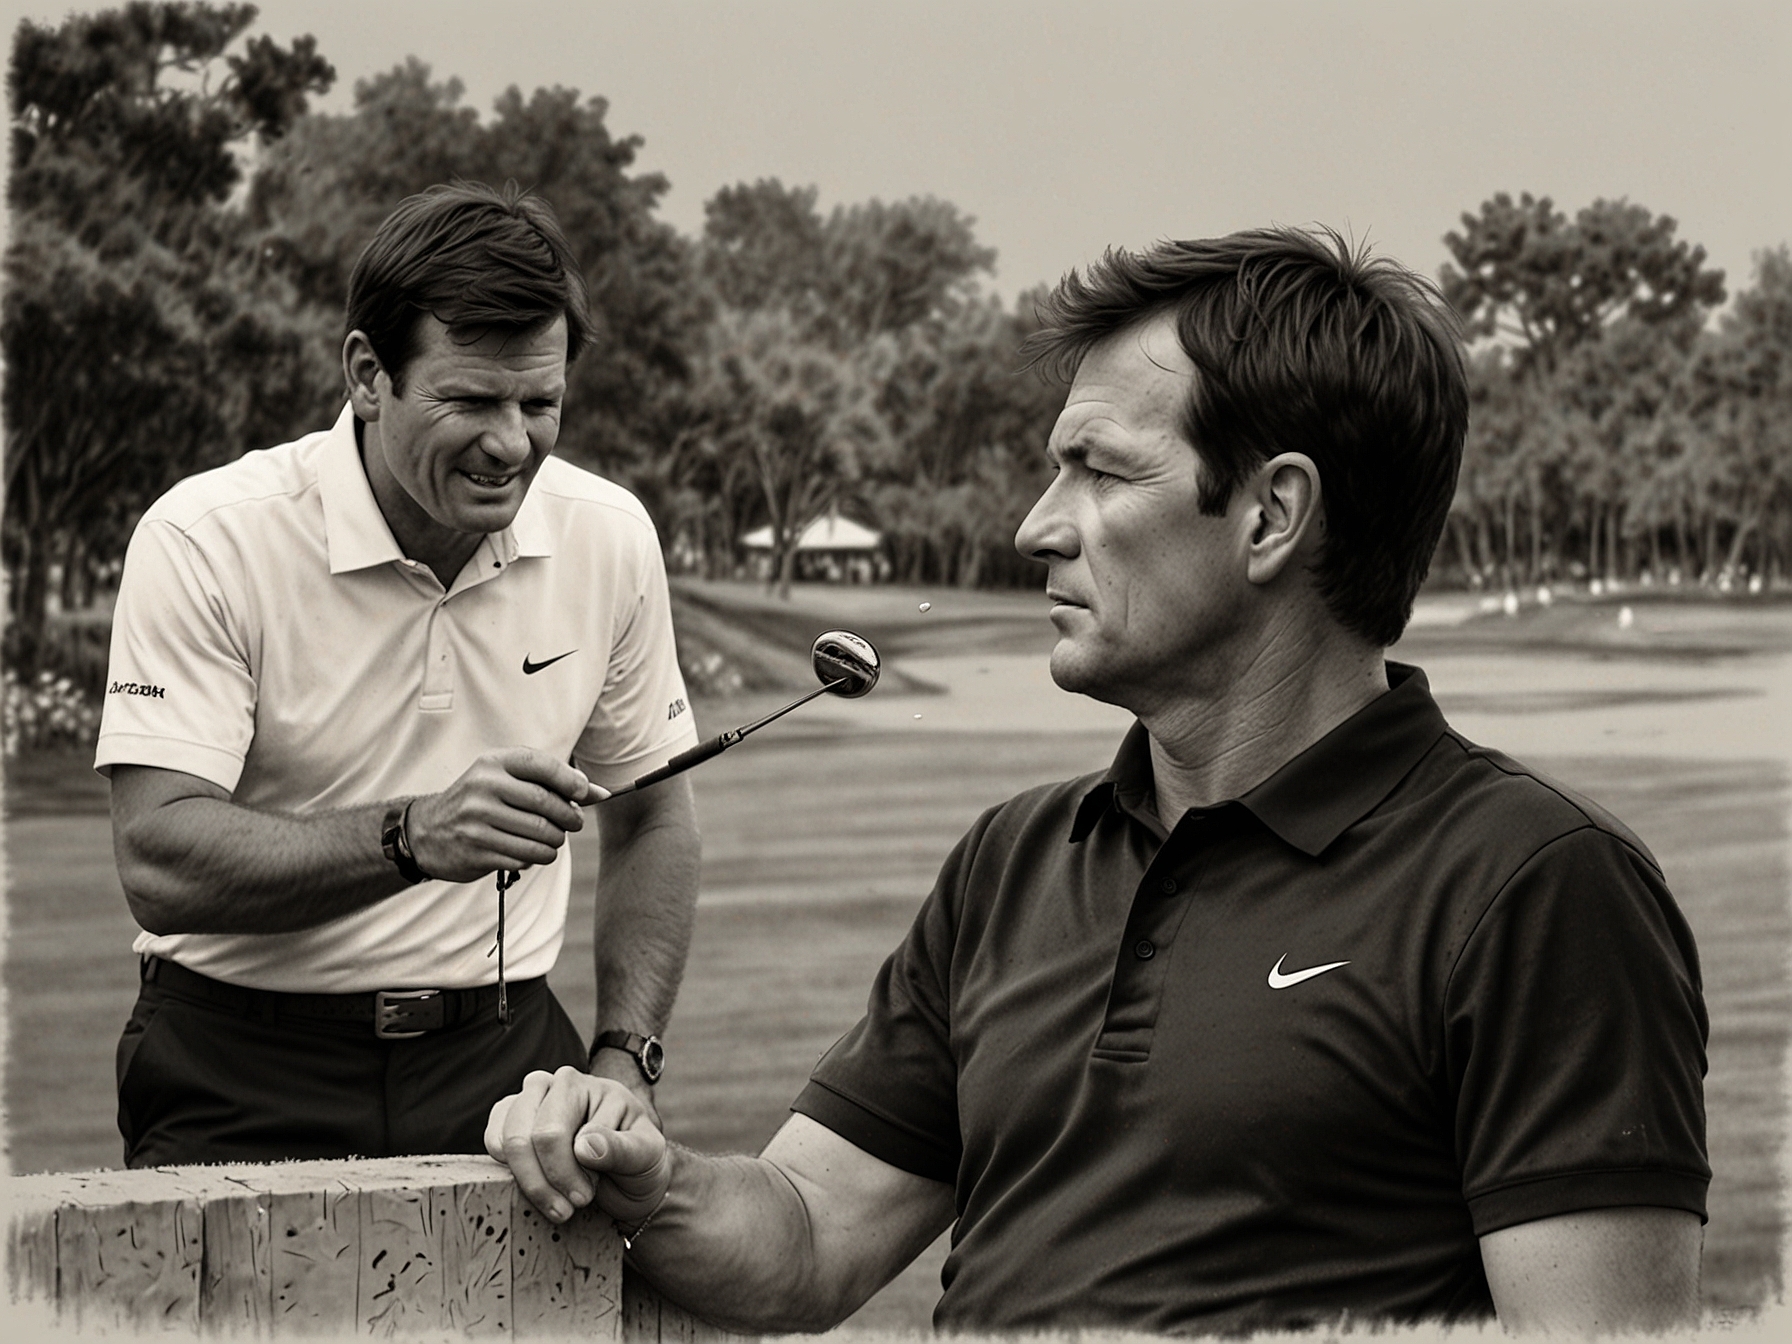 Sir Nick Faldo offers commentary on live television, emphasizing the psychological impact of McIlroy's late stumble at the US Open.